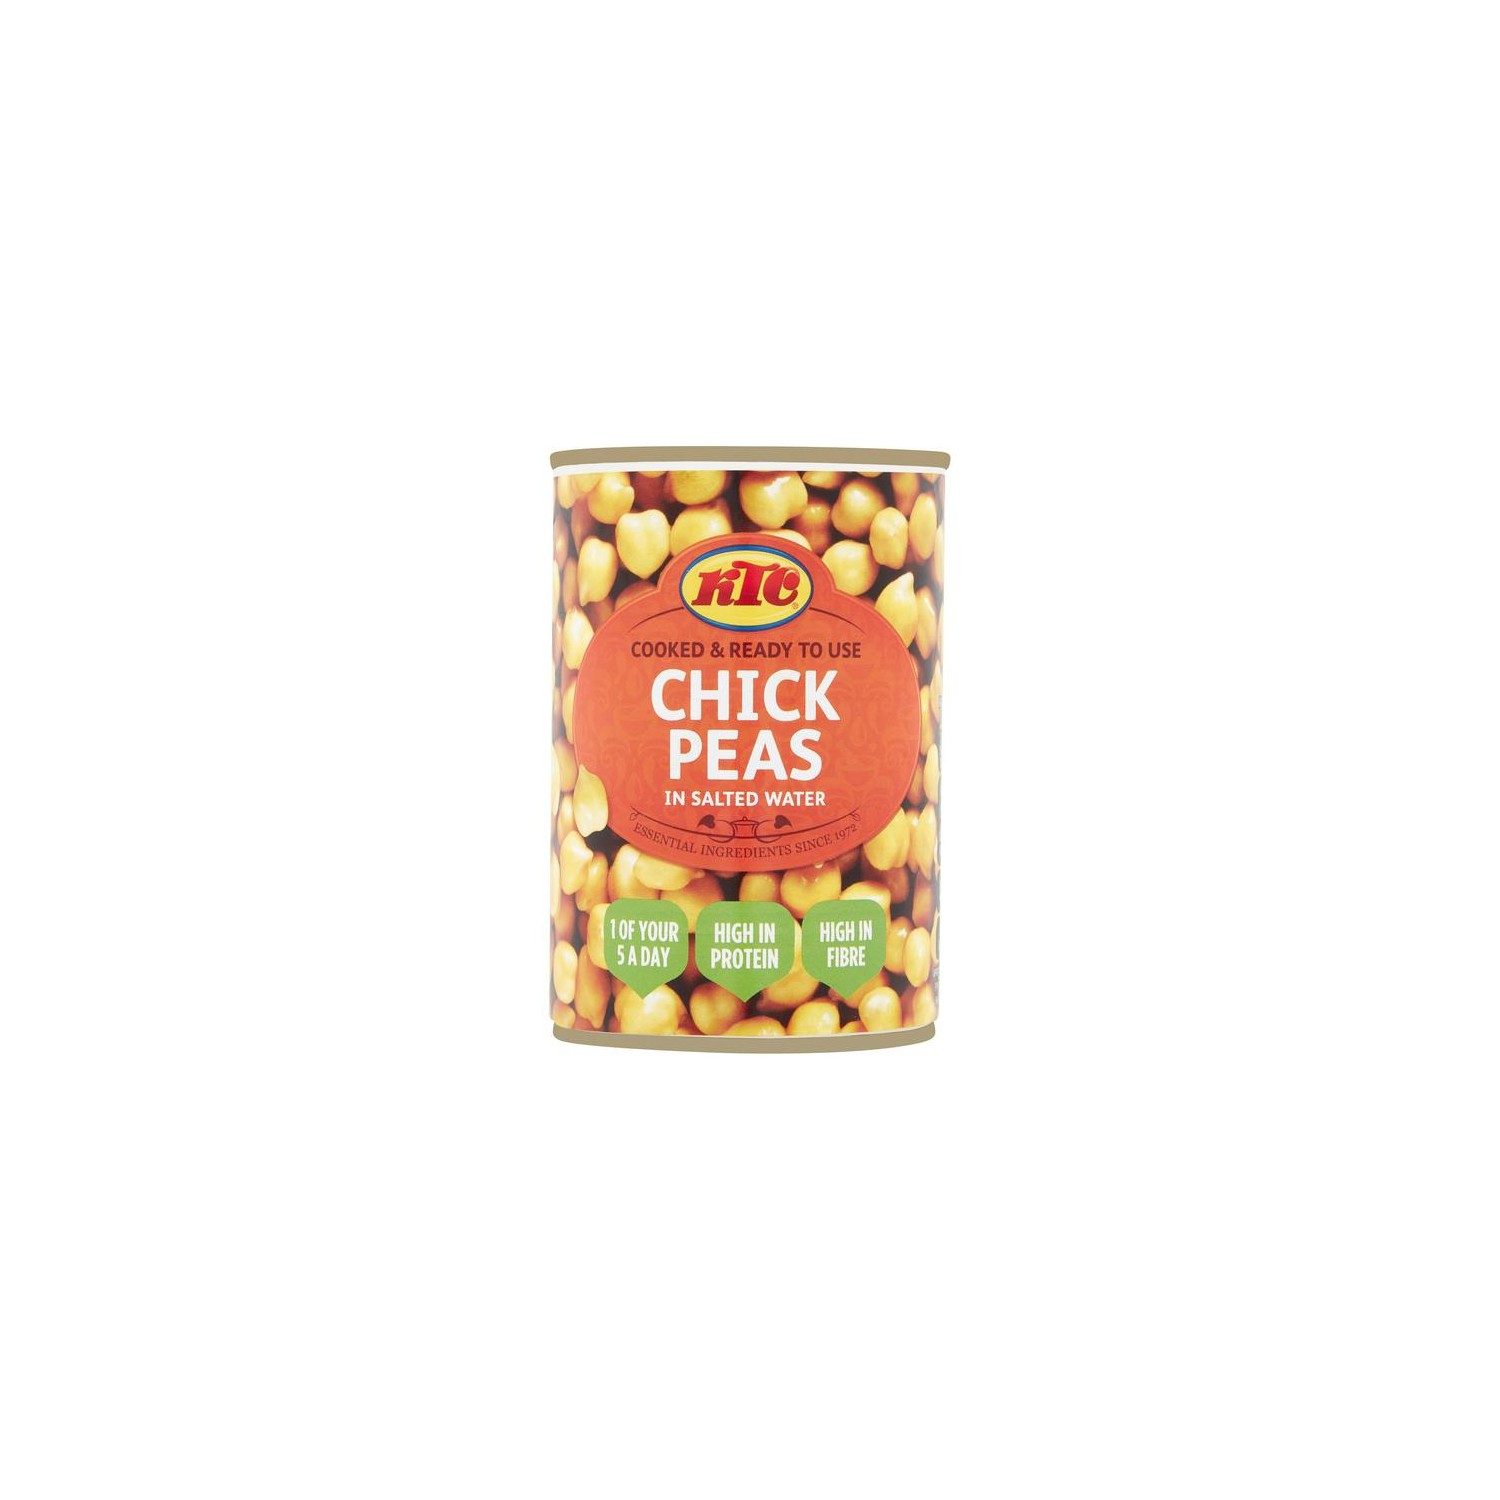 KTC - 400g - Cooked and Ready to Use Chick Peas